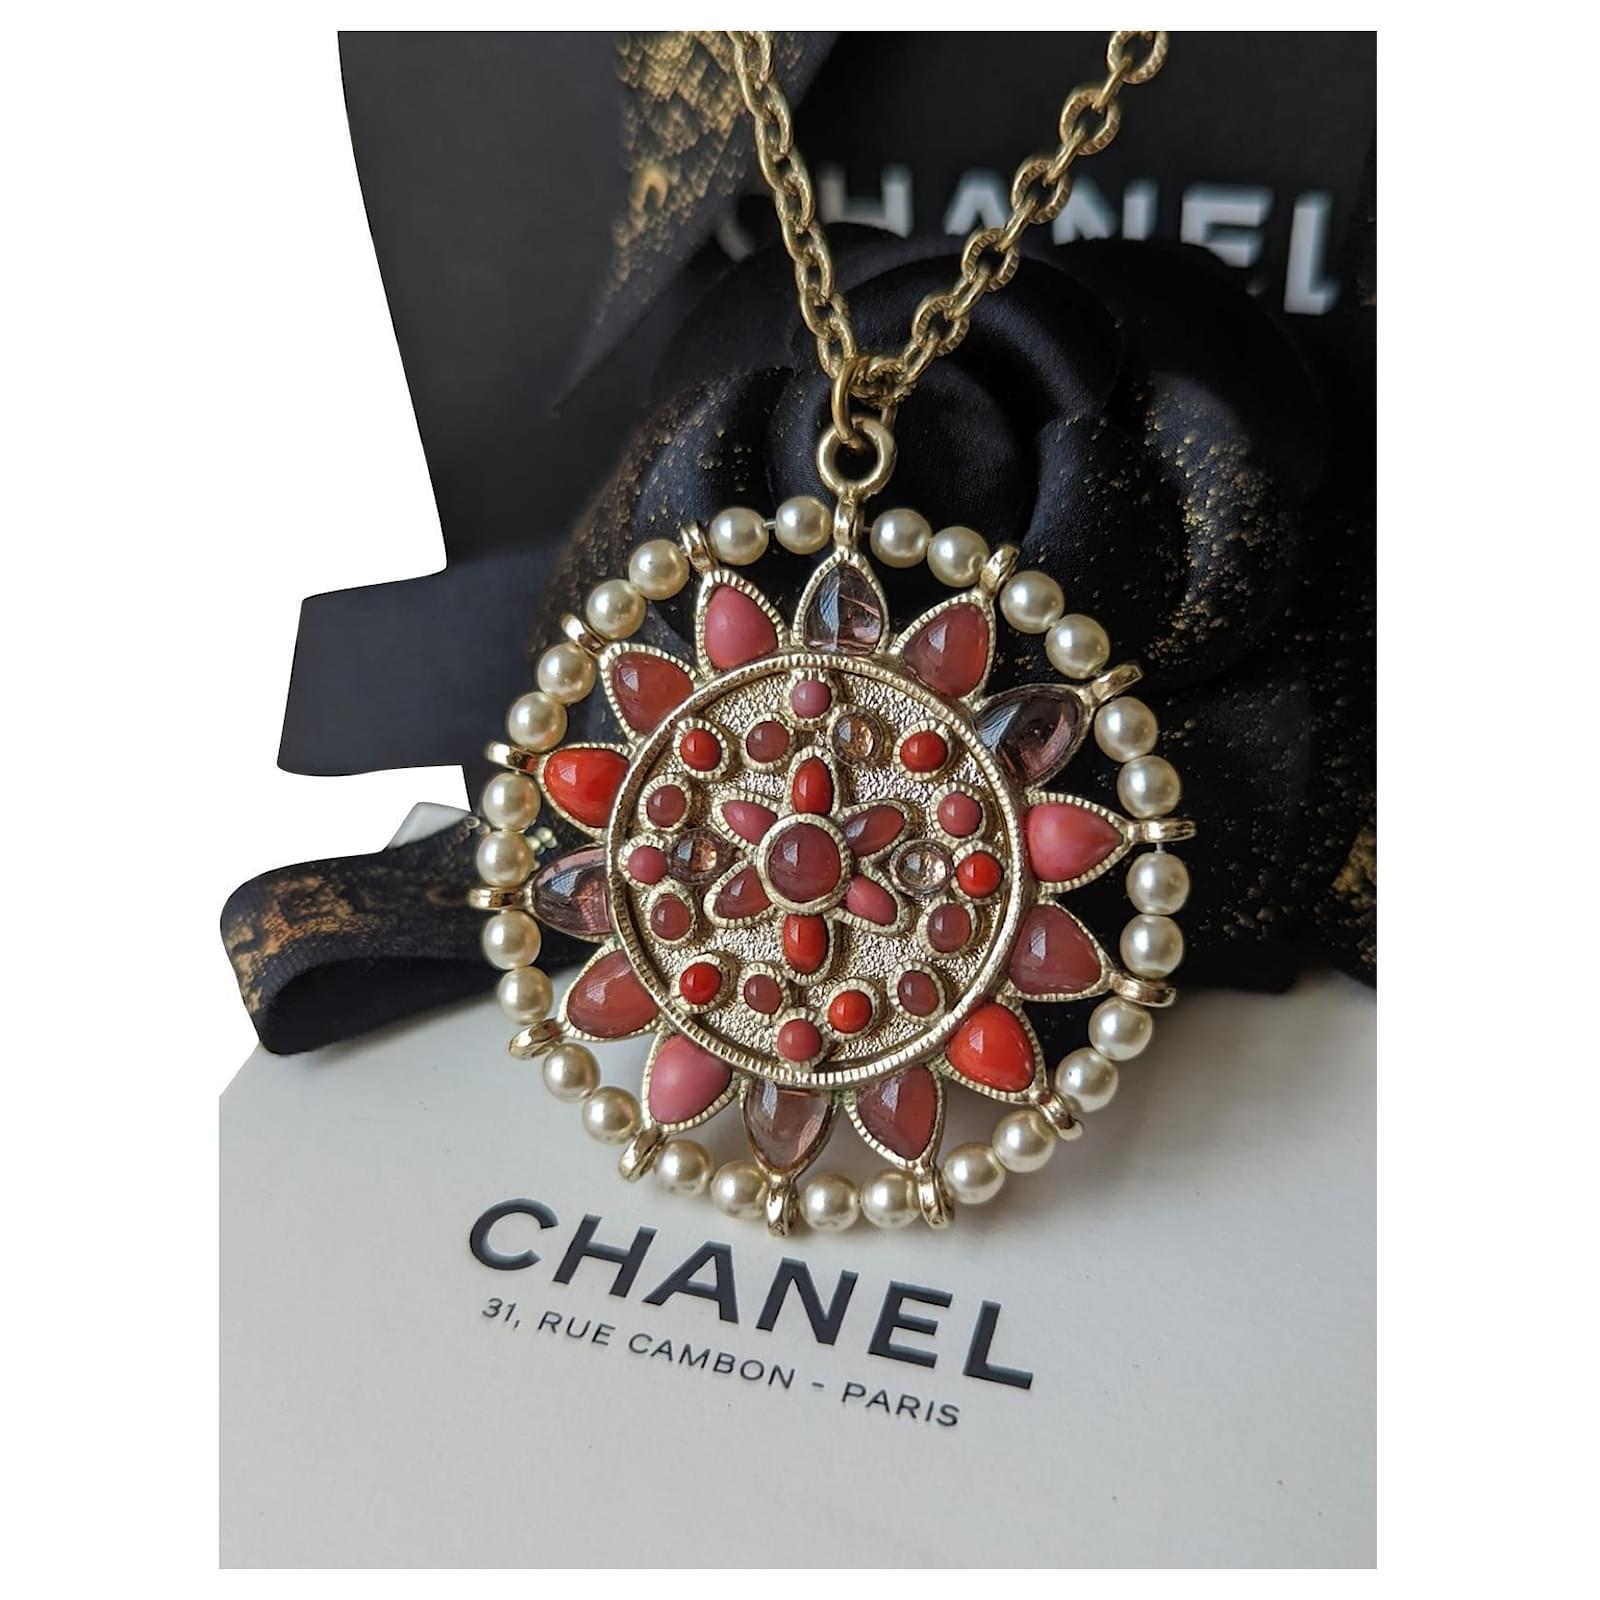 CHANEL, Jewelry, Auth Chanel Pink Enamel Cc Pendant Necklace